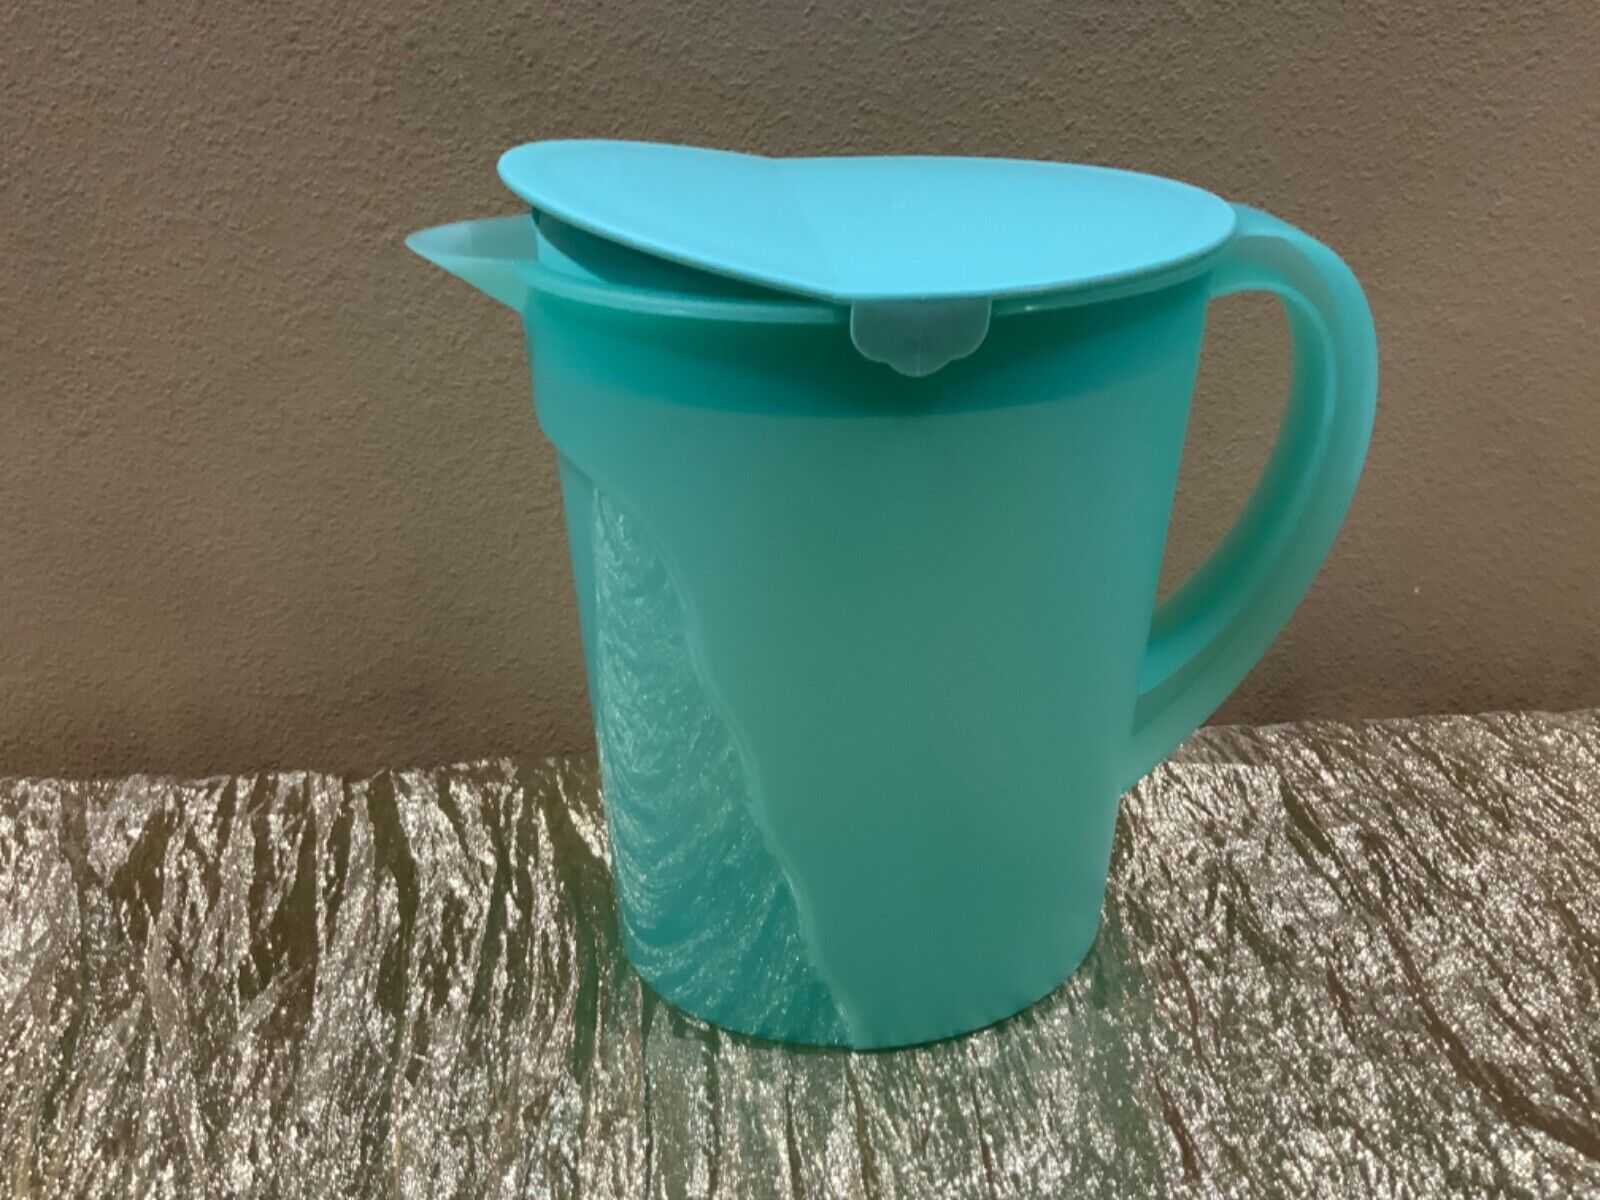 New Tupperware Beautiful Jumbo Expression Pitcher 1 Gallon 3.7L in Mint Color